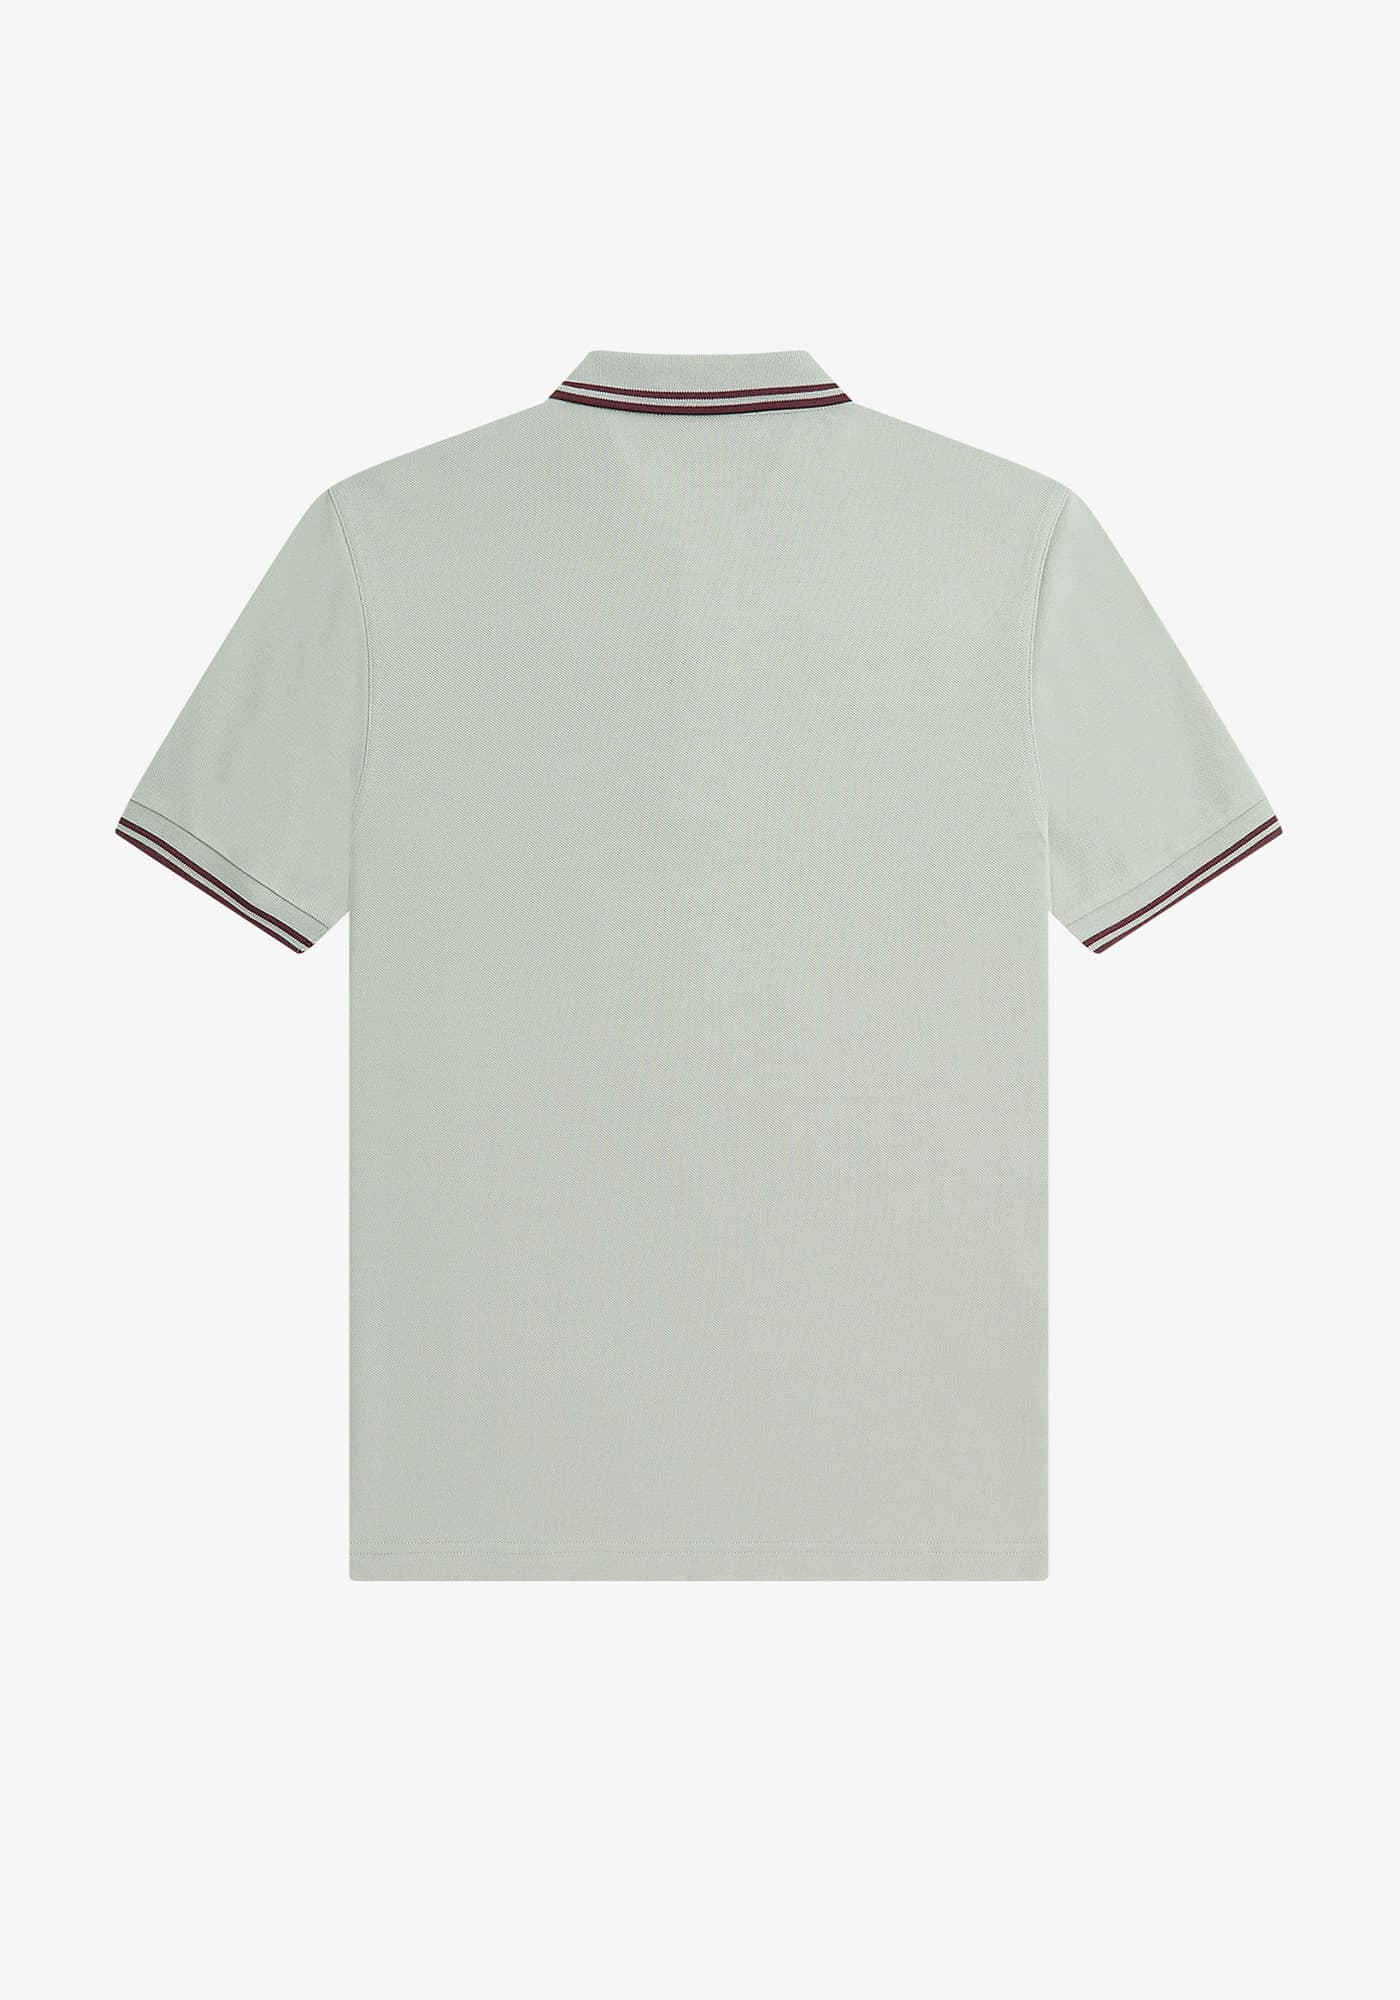 The Fred Perry Shirt - M3600(S 181: LIMESTONE)｜ FRED PERRY｜渋谷